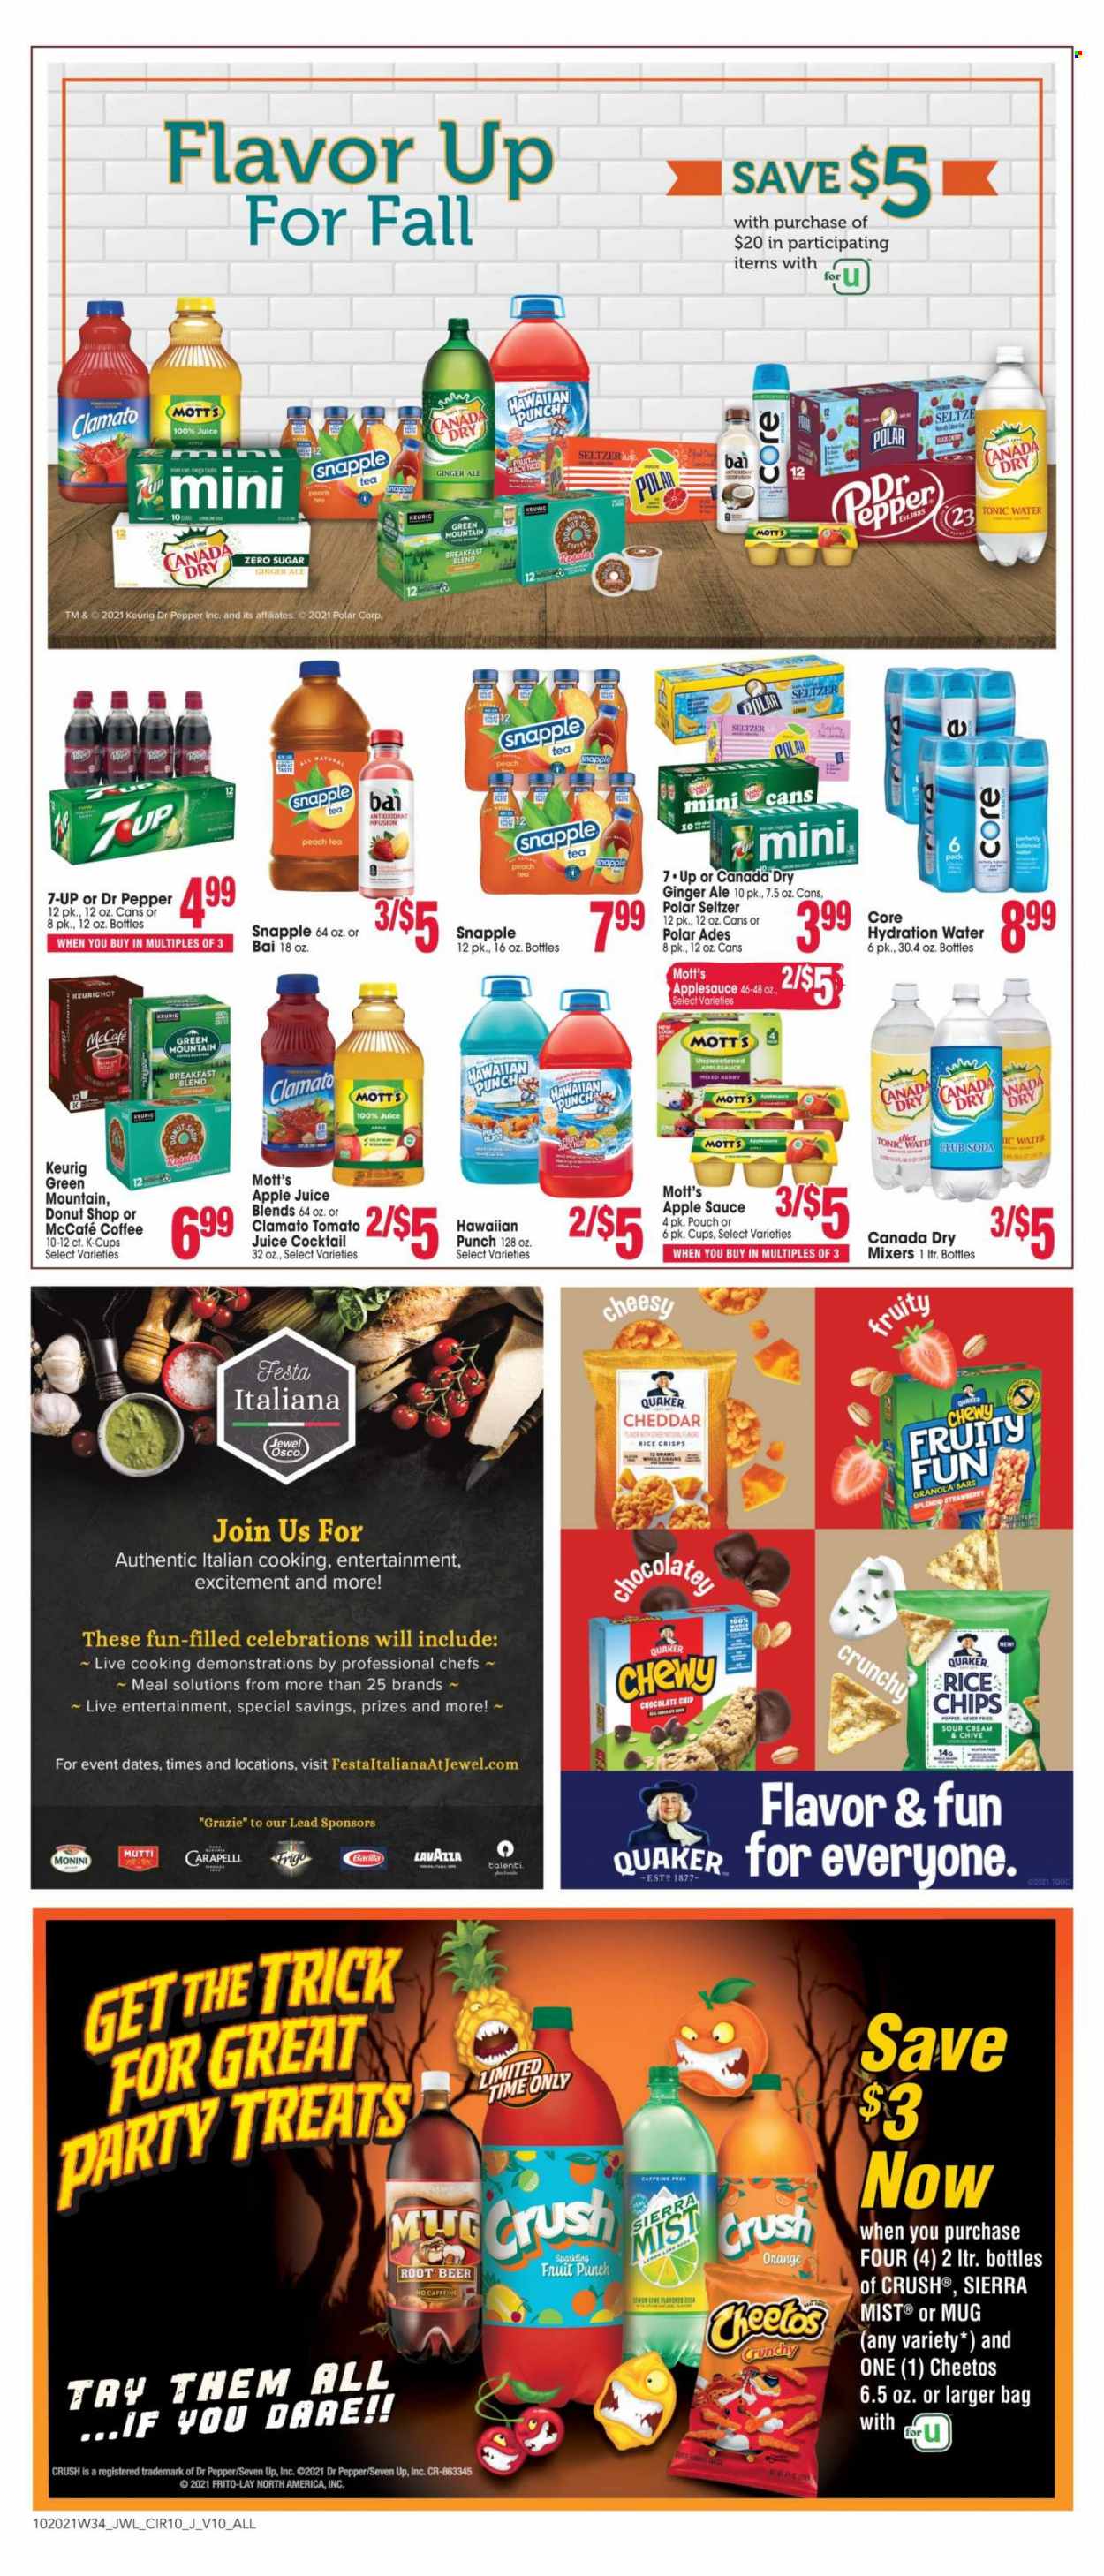 thumbnail - Jewel Osco Flyer - 10/20/2021 - 10/26/2021 - Sales products - Mott's, sauce, Barilla, Quaker, cheese, sour cream, Talenti Gelato, Celebration, Cheetos, chips, Frito-Lay, rice crisps, granola bar, rice, apple sauce, apple juice, Canada Dry, ginger ale, tomato juice, juice, Dr. Pepper, tonic, Clamato, 7UP, Snapple, Sierra Mist, Bai, fruit punch, Club Soda, seltzer water, tea, coffee, coffee capsules, McCafe, K-Cups, Keurig, Lavazza, breakfast blend, Green Mountain, beer, bag, mug. Page 10.